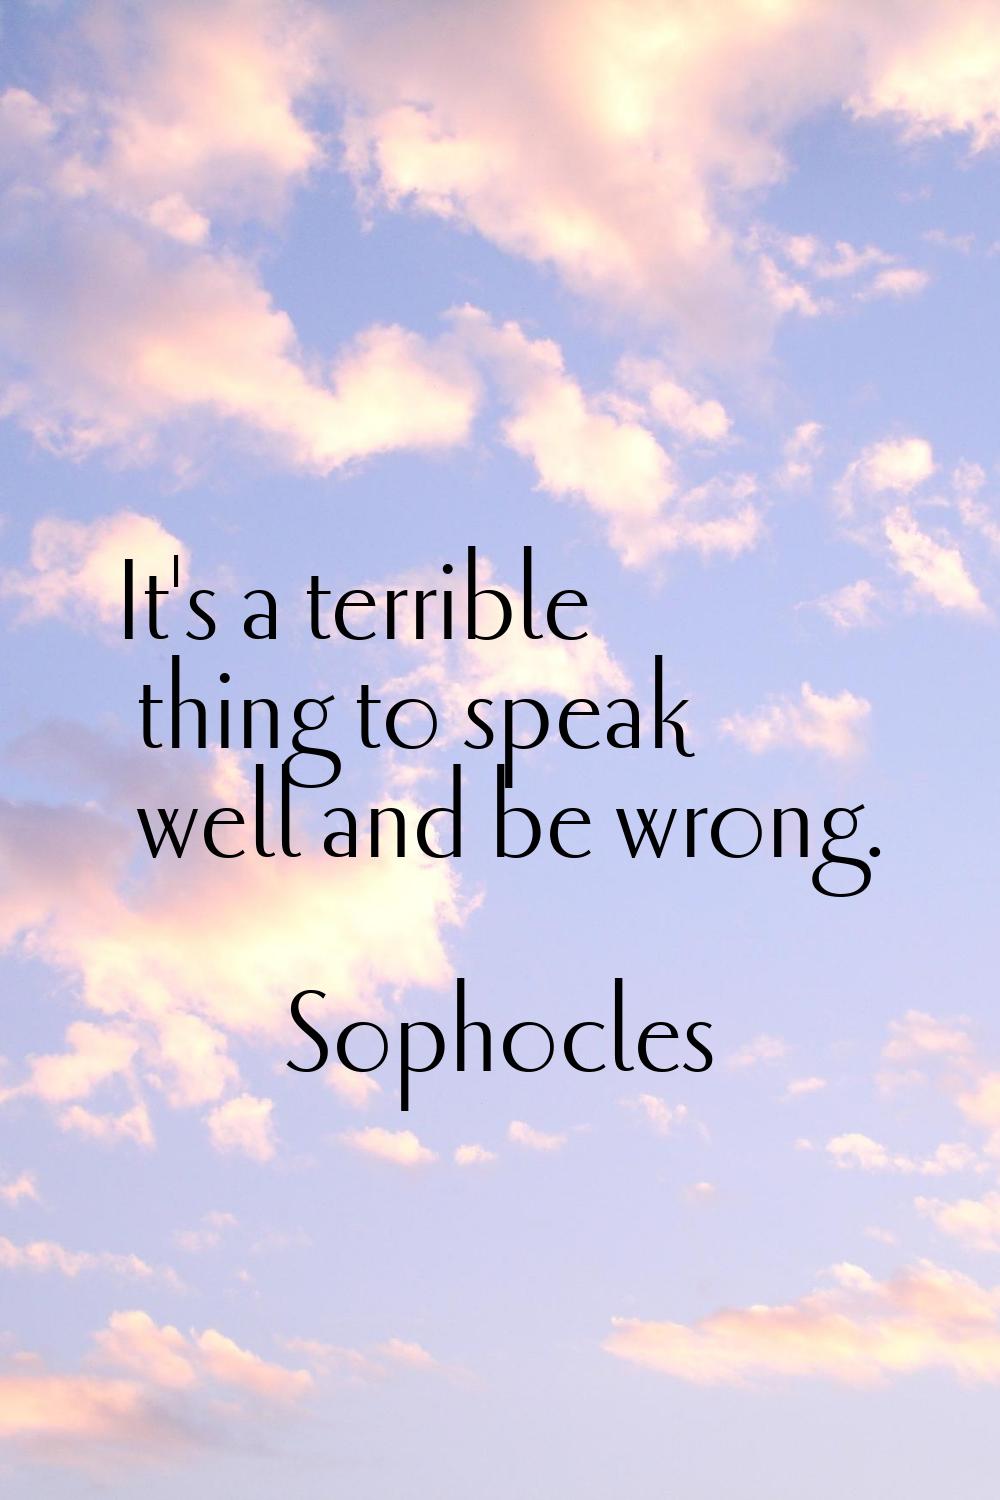 It's a terrible thing to speak well and be wrong.